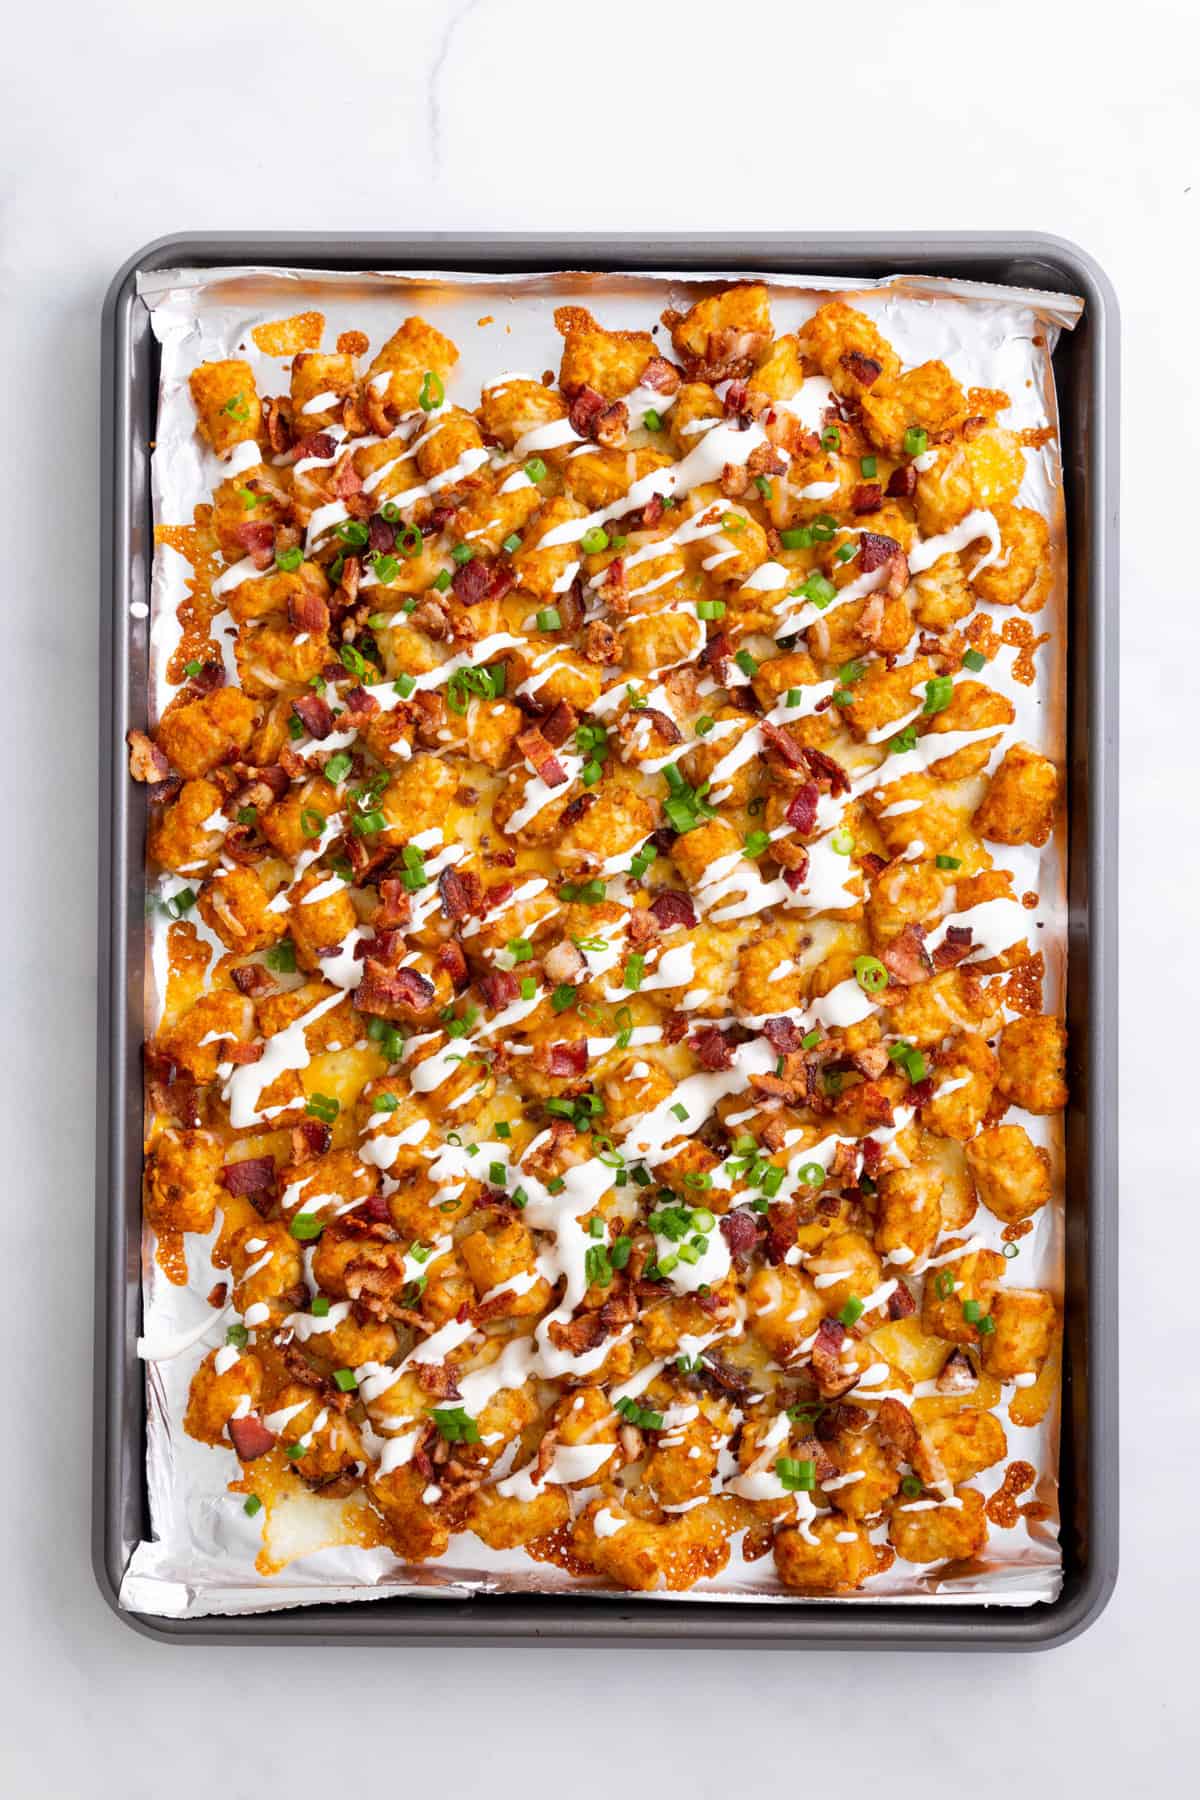 step 4 to make loaded tater tots, top with chopped bacon pieces, green onion and sour cream